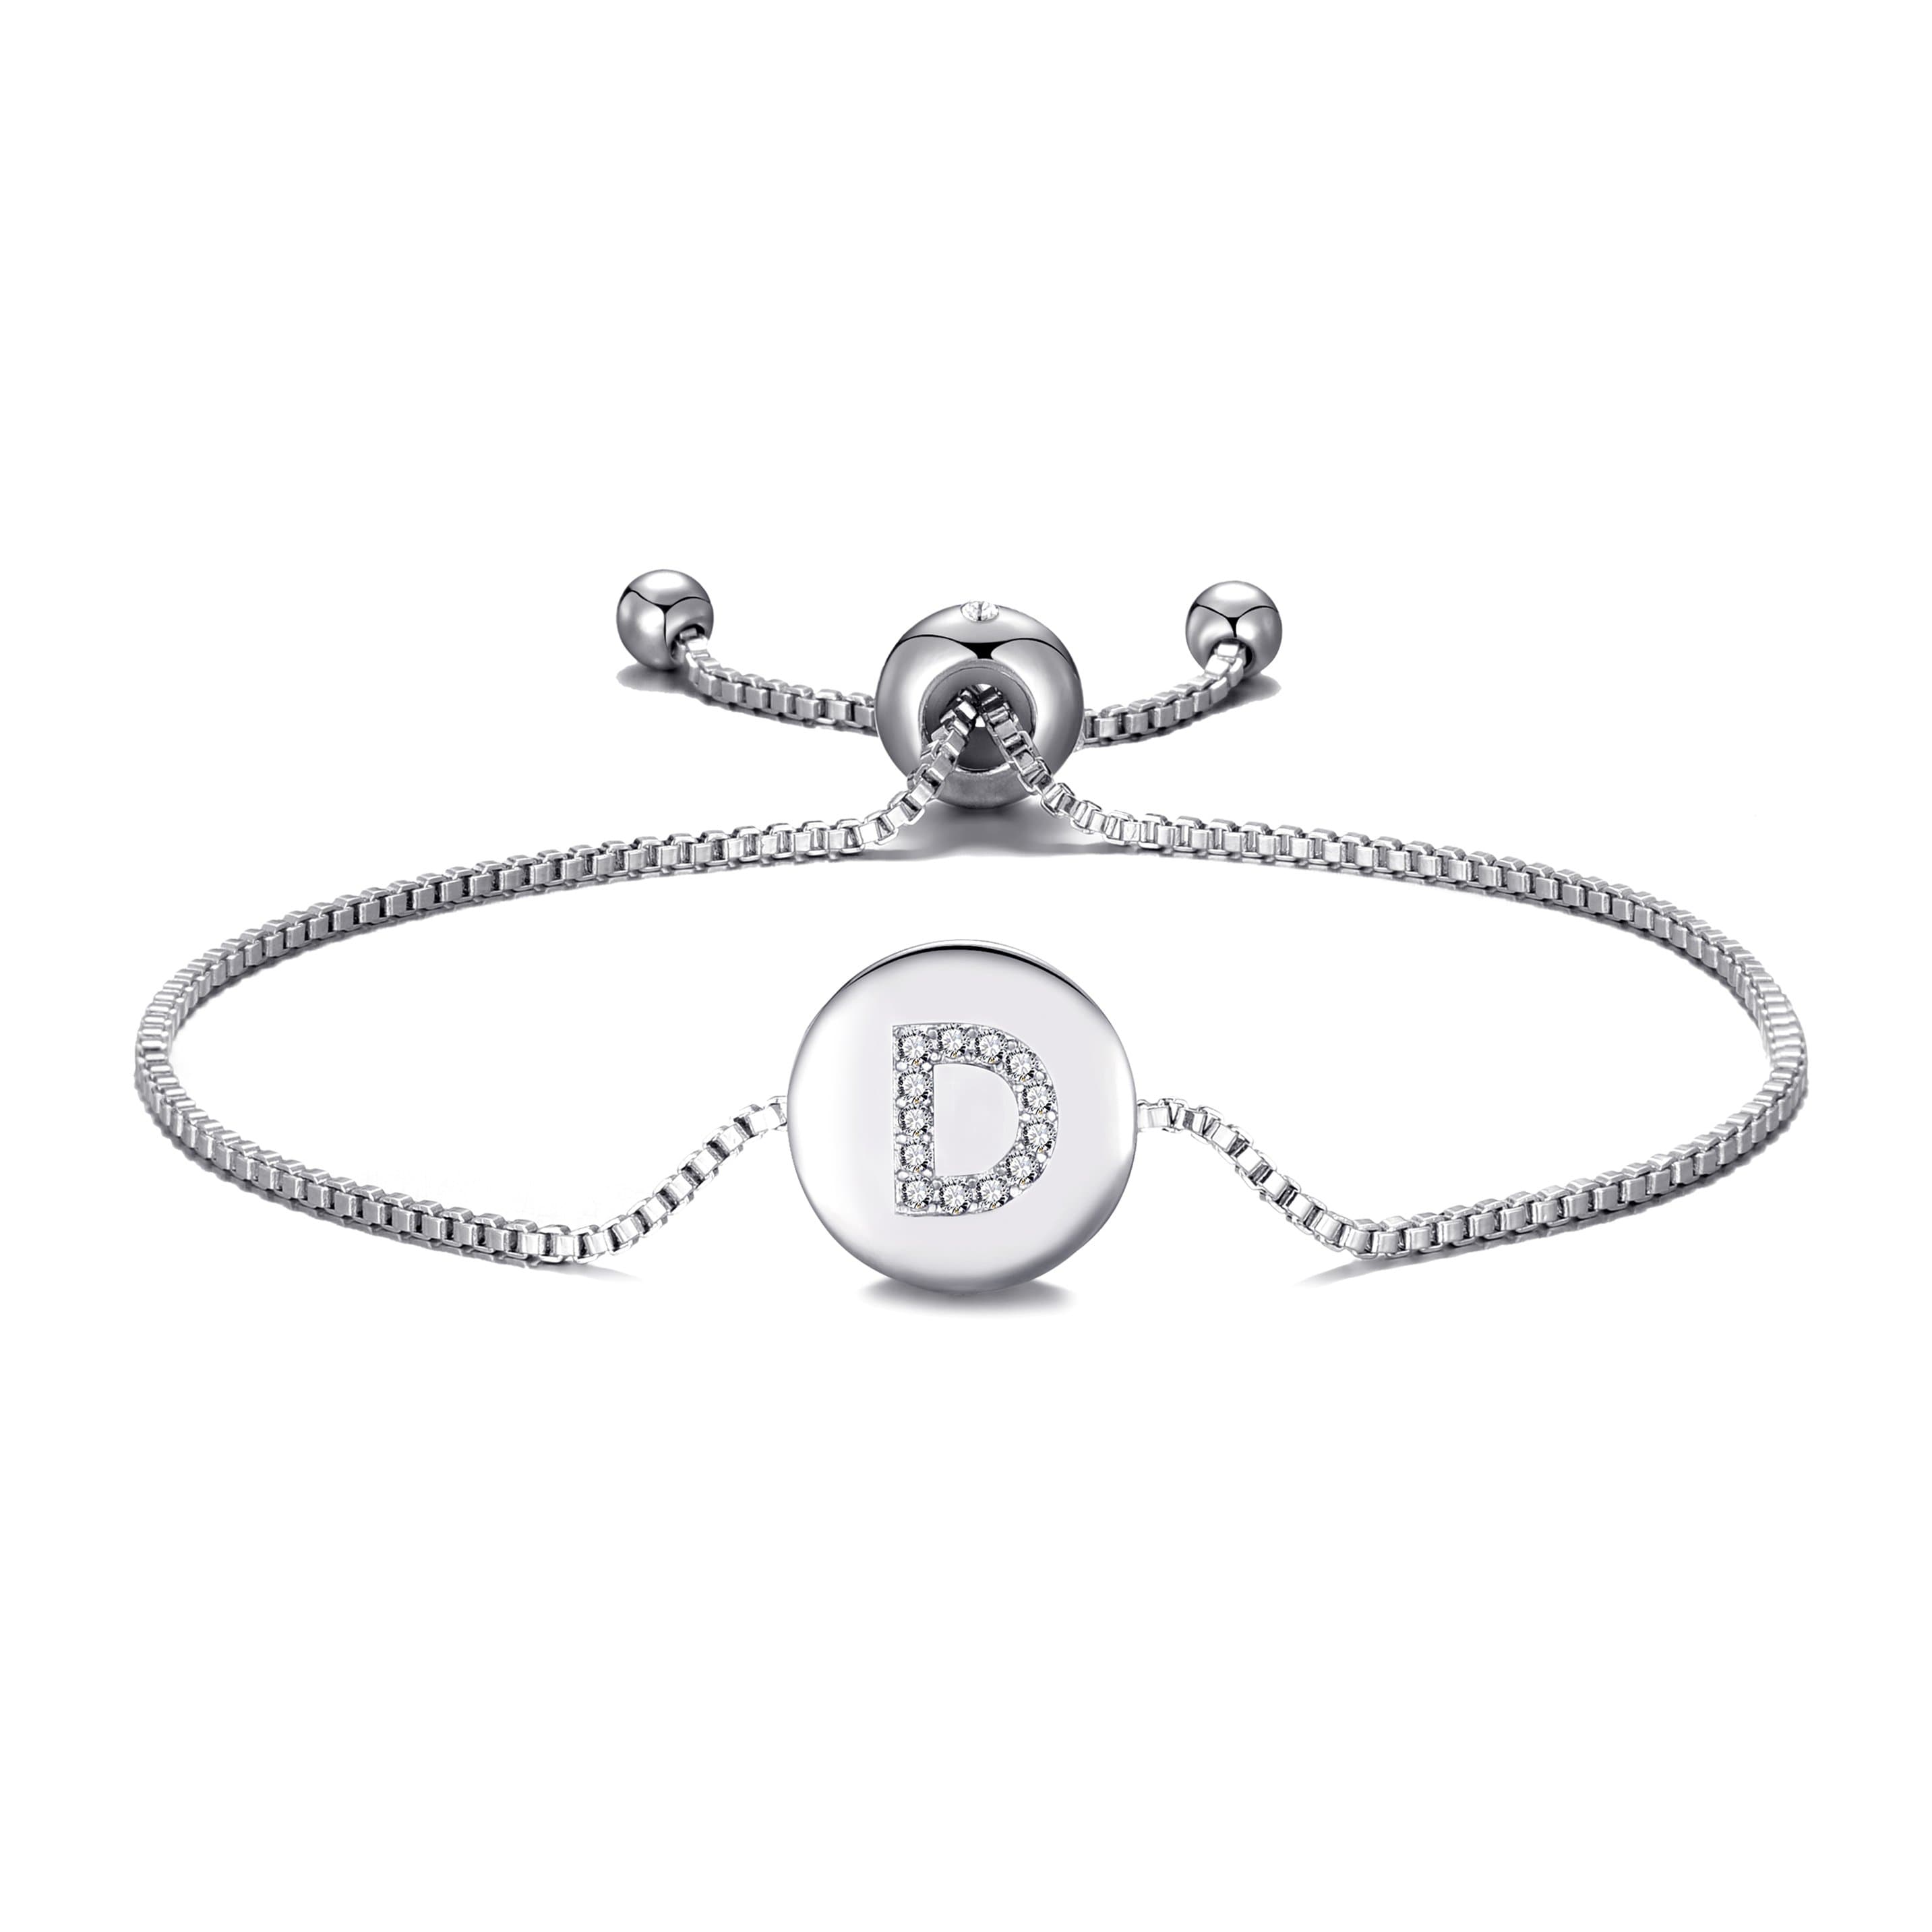 Initial Friendship Bracelet Letter D Created with Zircondia® Crystals by Philip Jones Jewellery